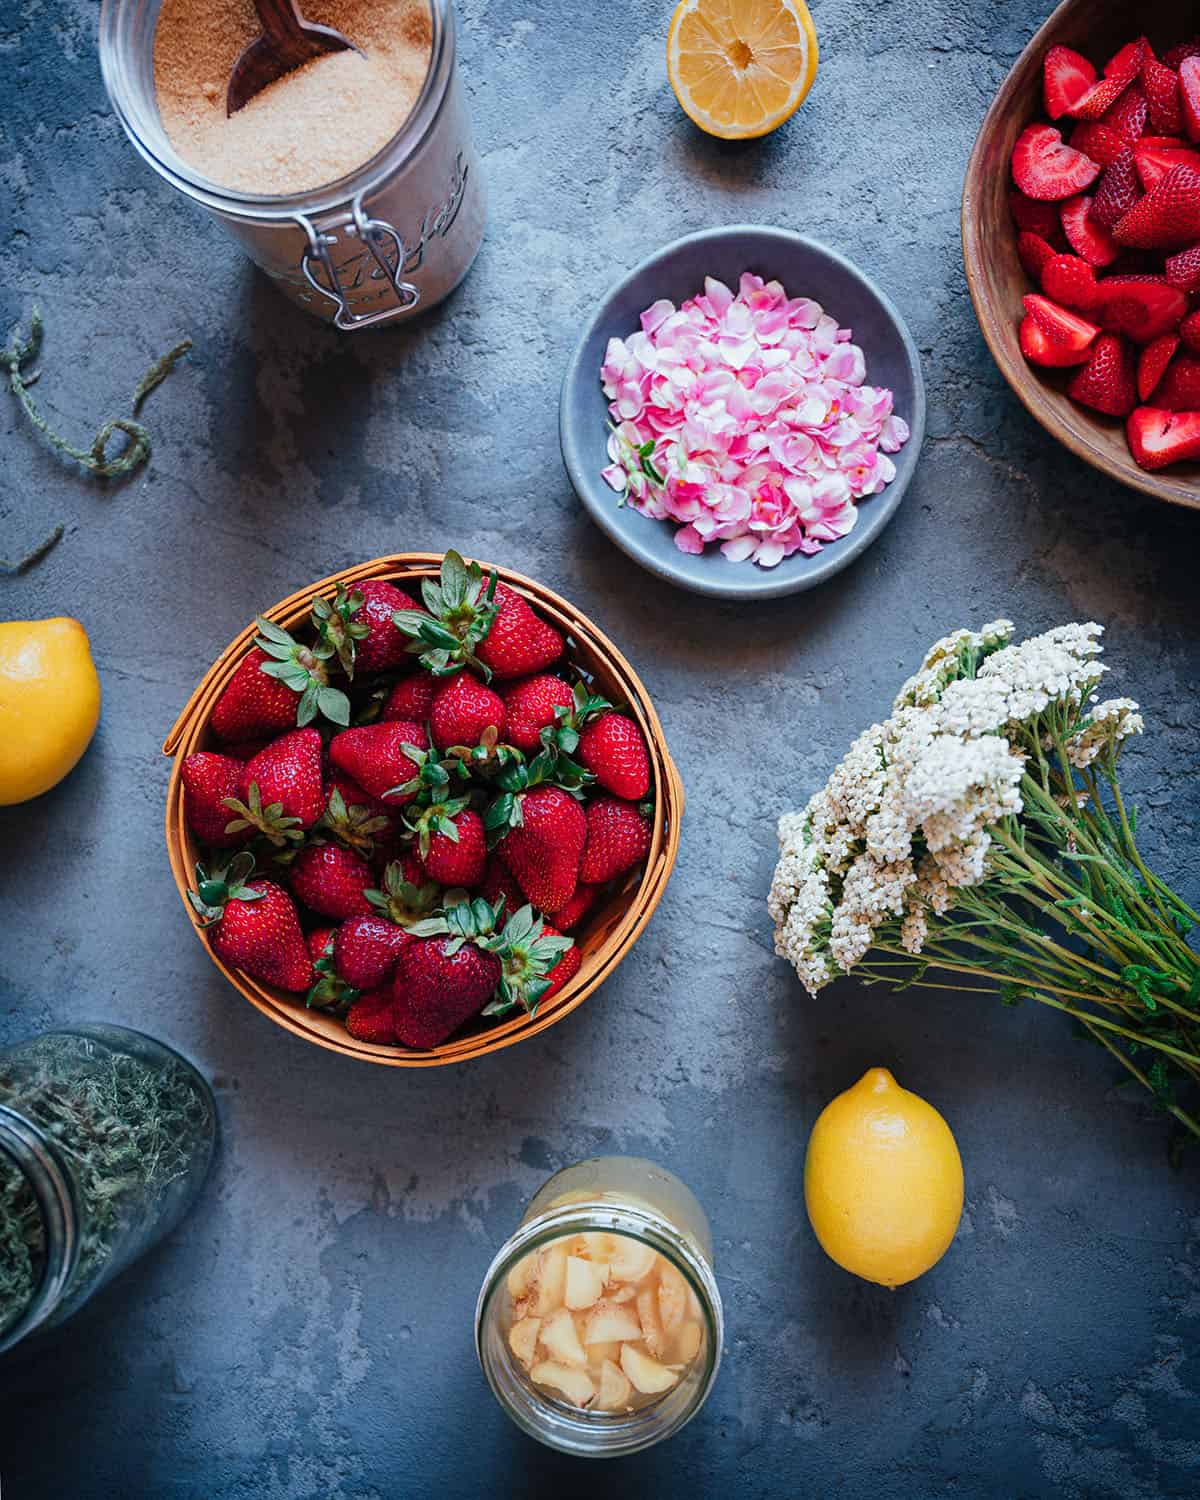 Ingredients for yarrow strawberry soda in bowls, with yarrow bunched.